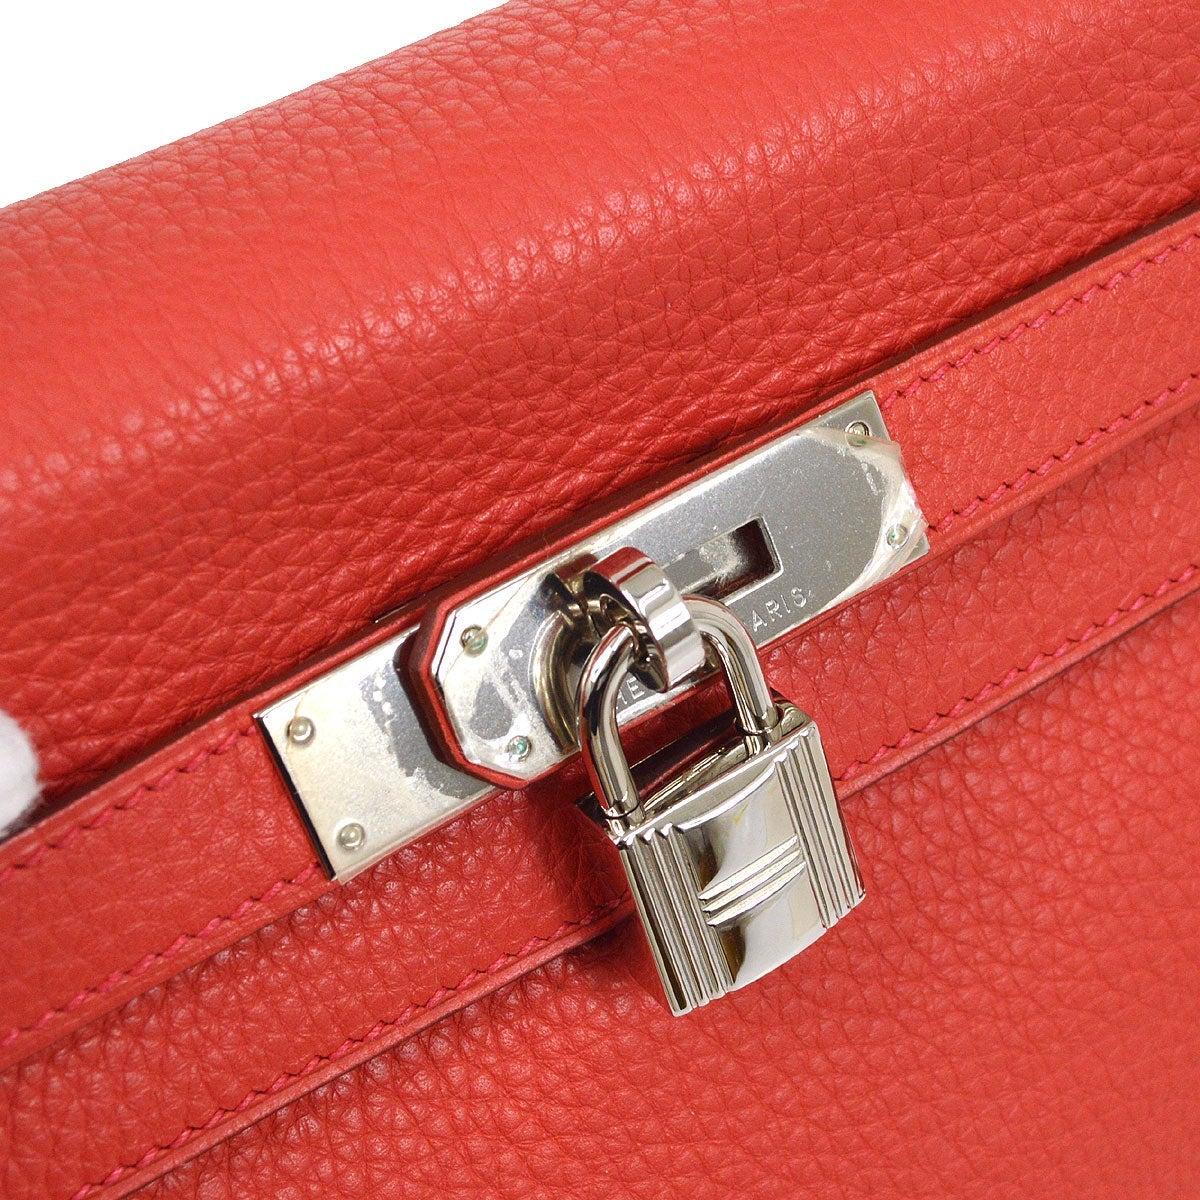 Pre-Owned Vintage Condition
From 2010 Collection
Taurillon Clemence Leather
Palladium Hardware
Measures 11